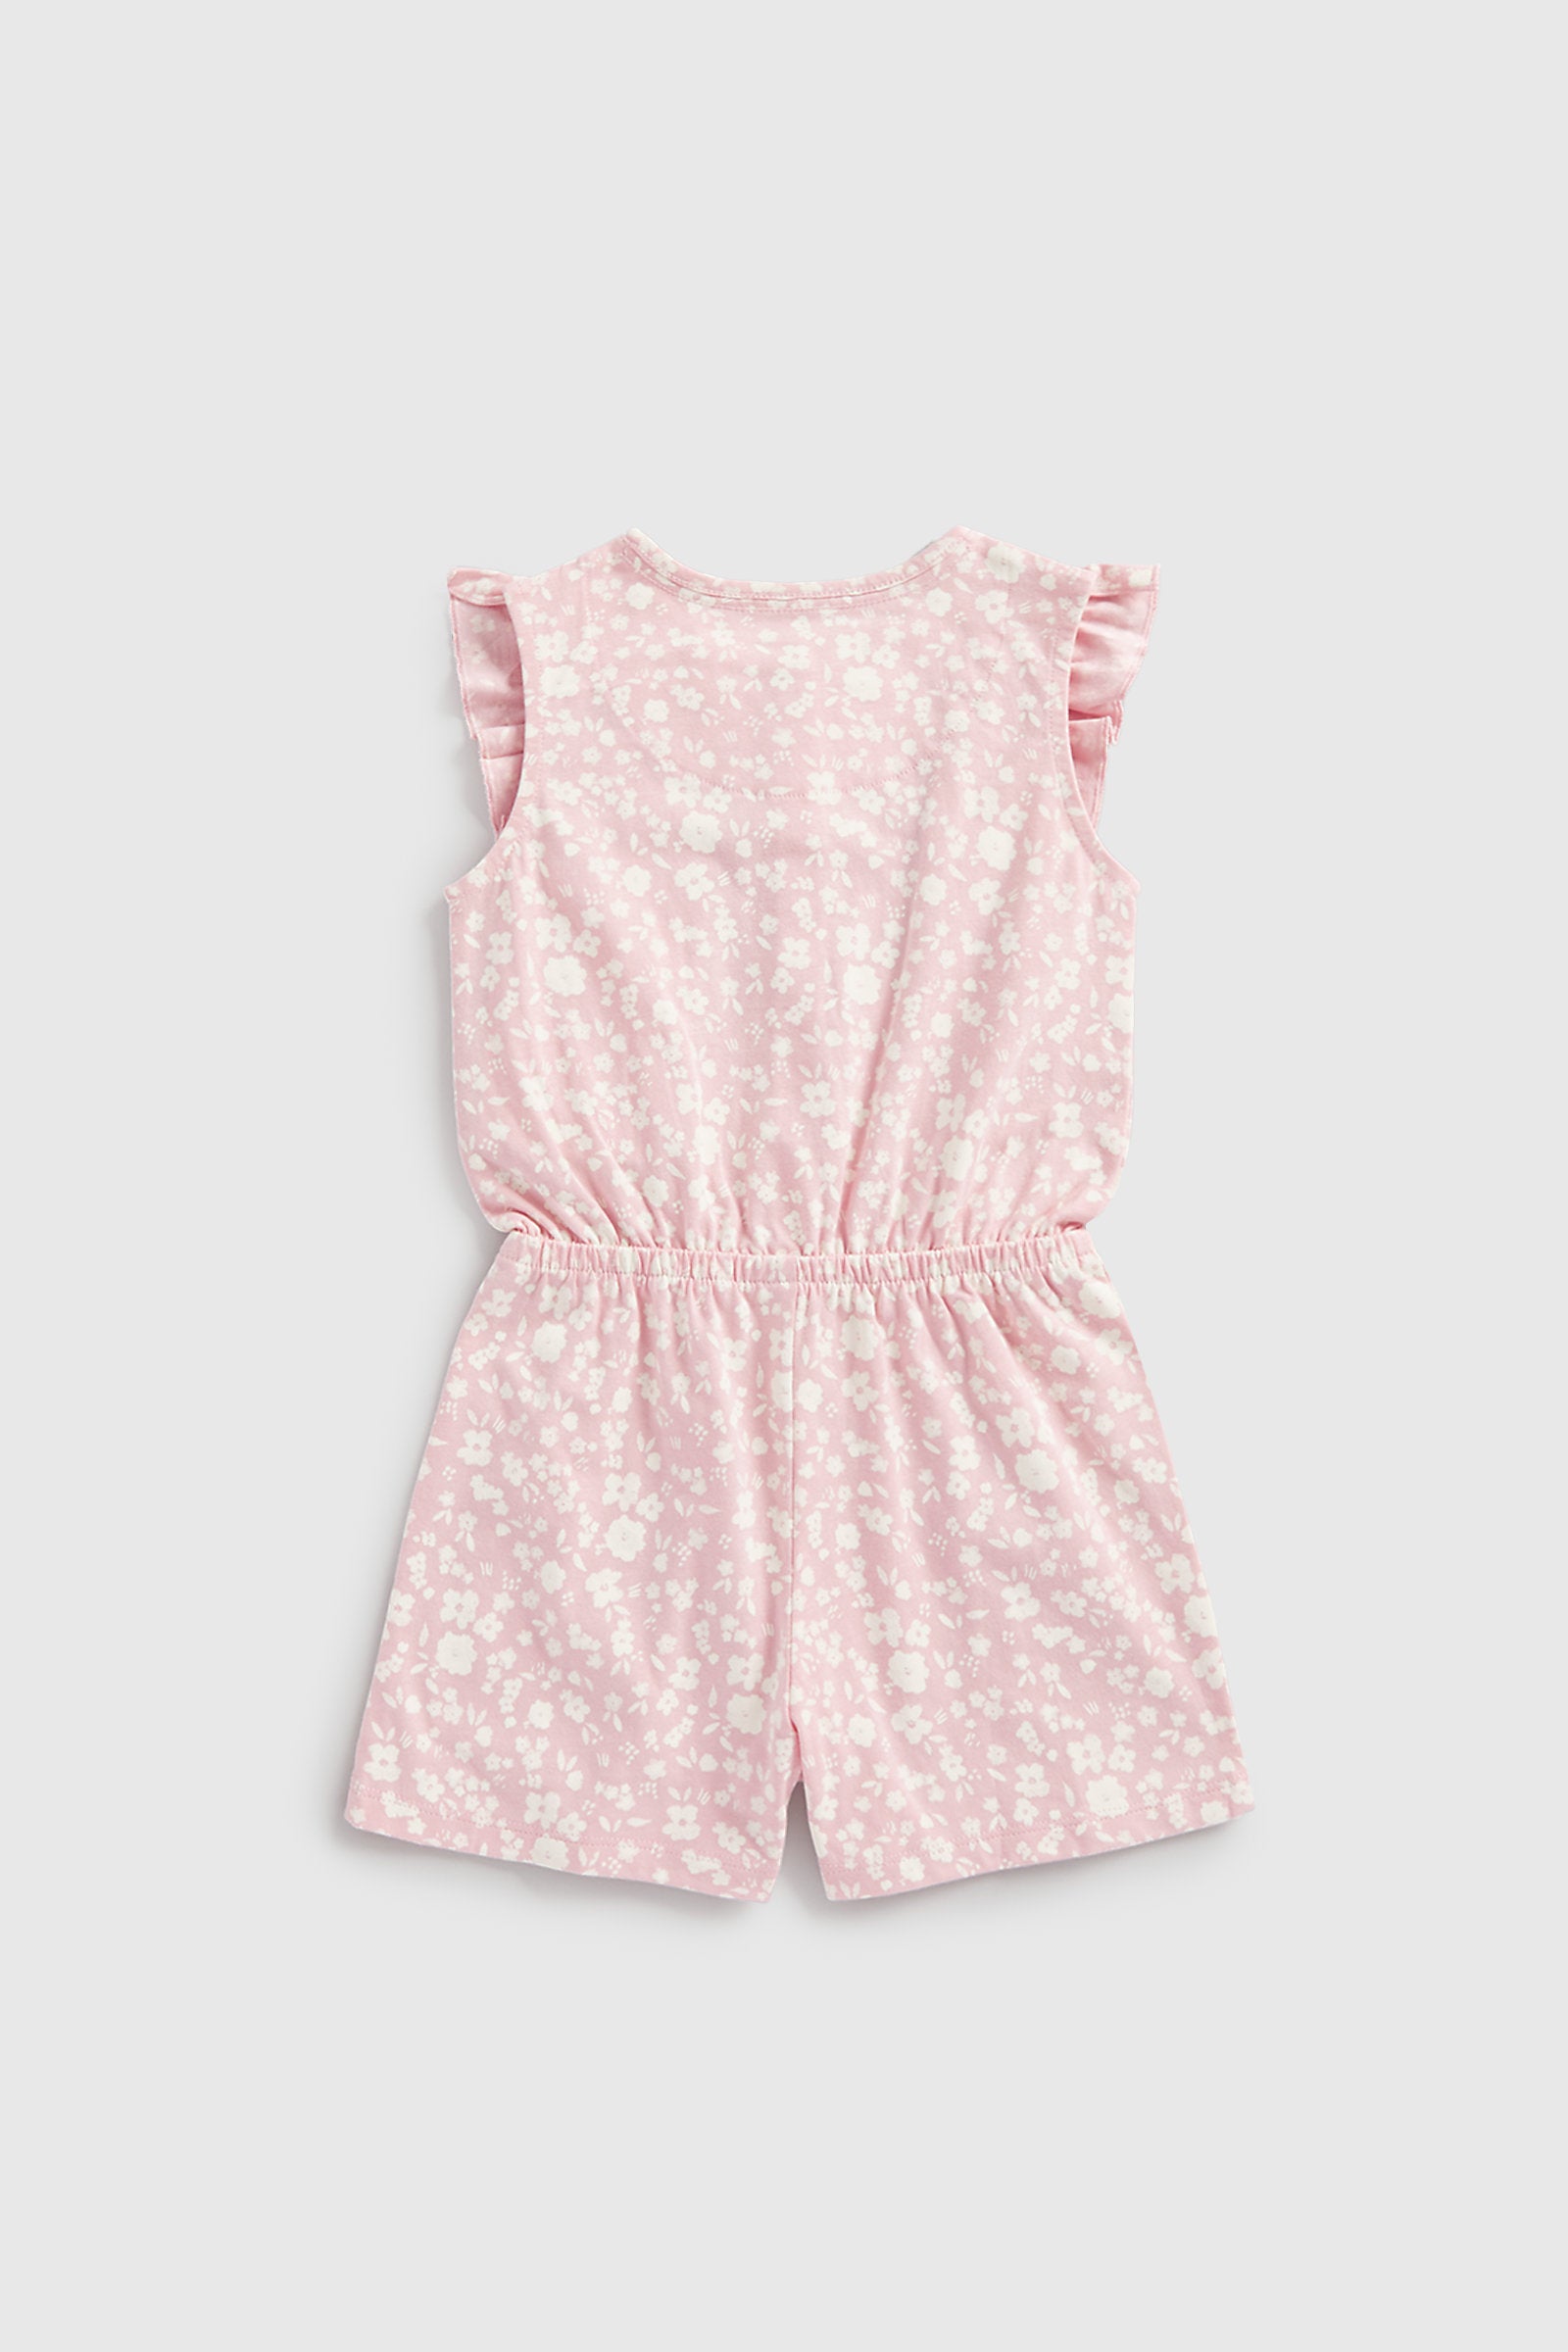 Mothercare Pink Floral Playsuit